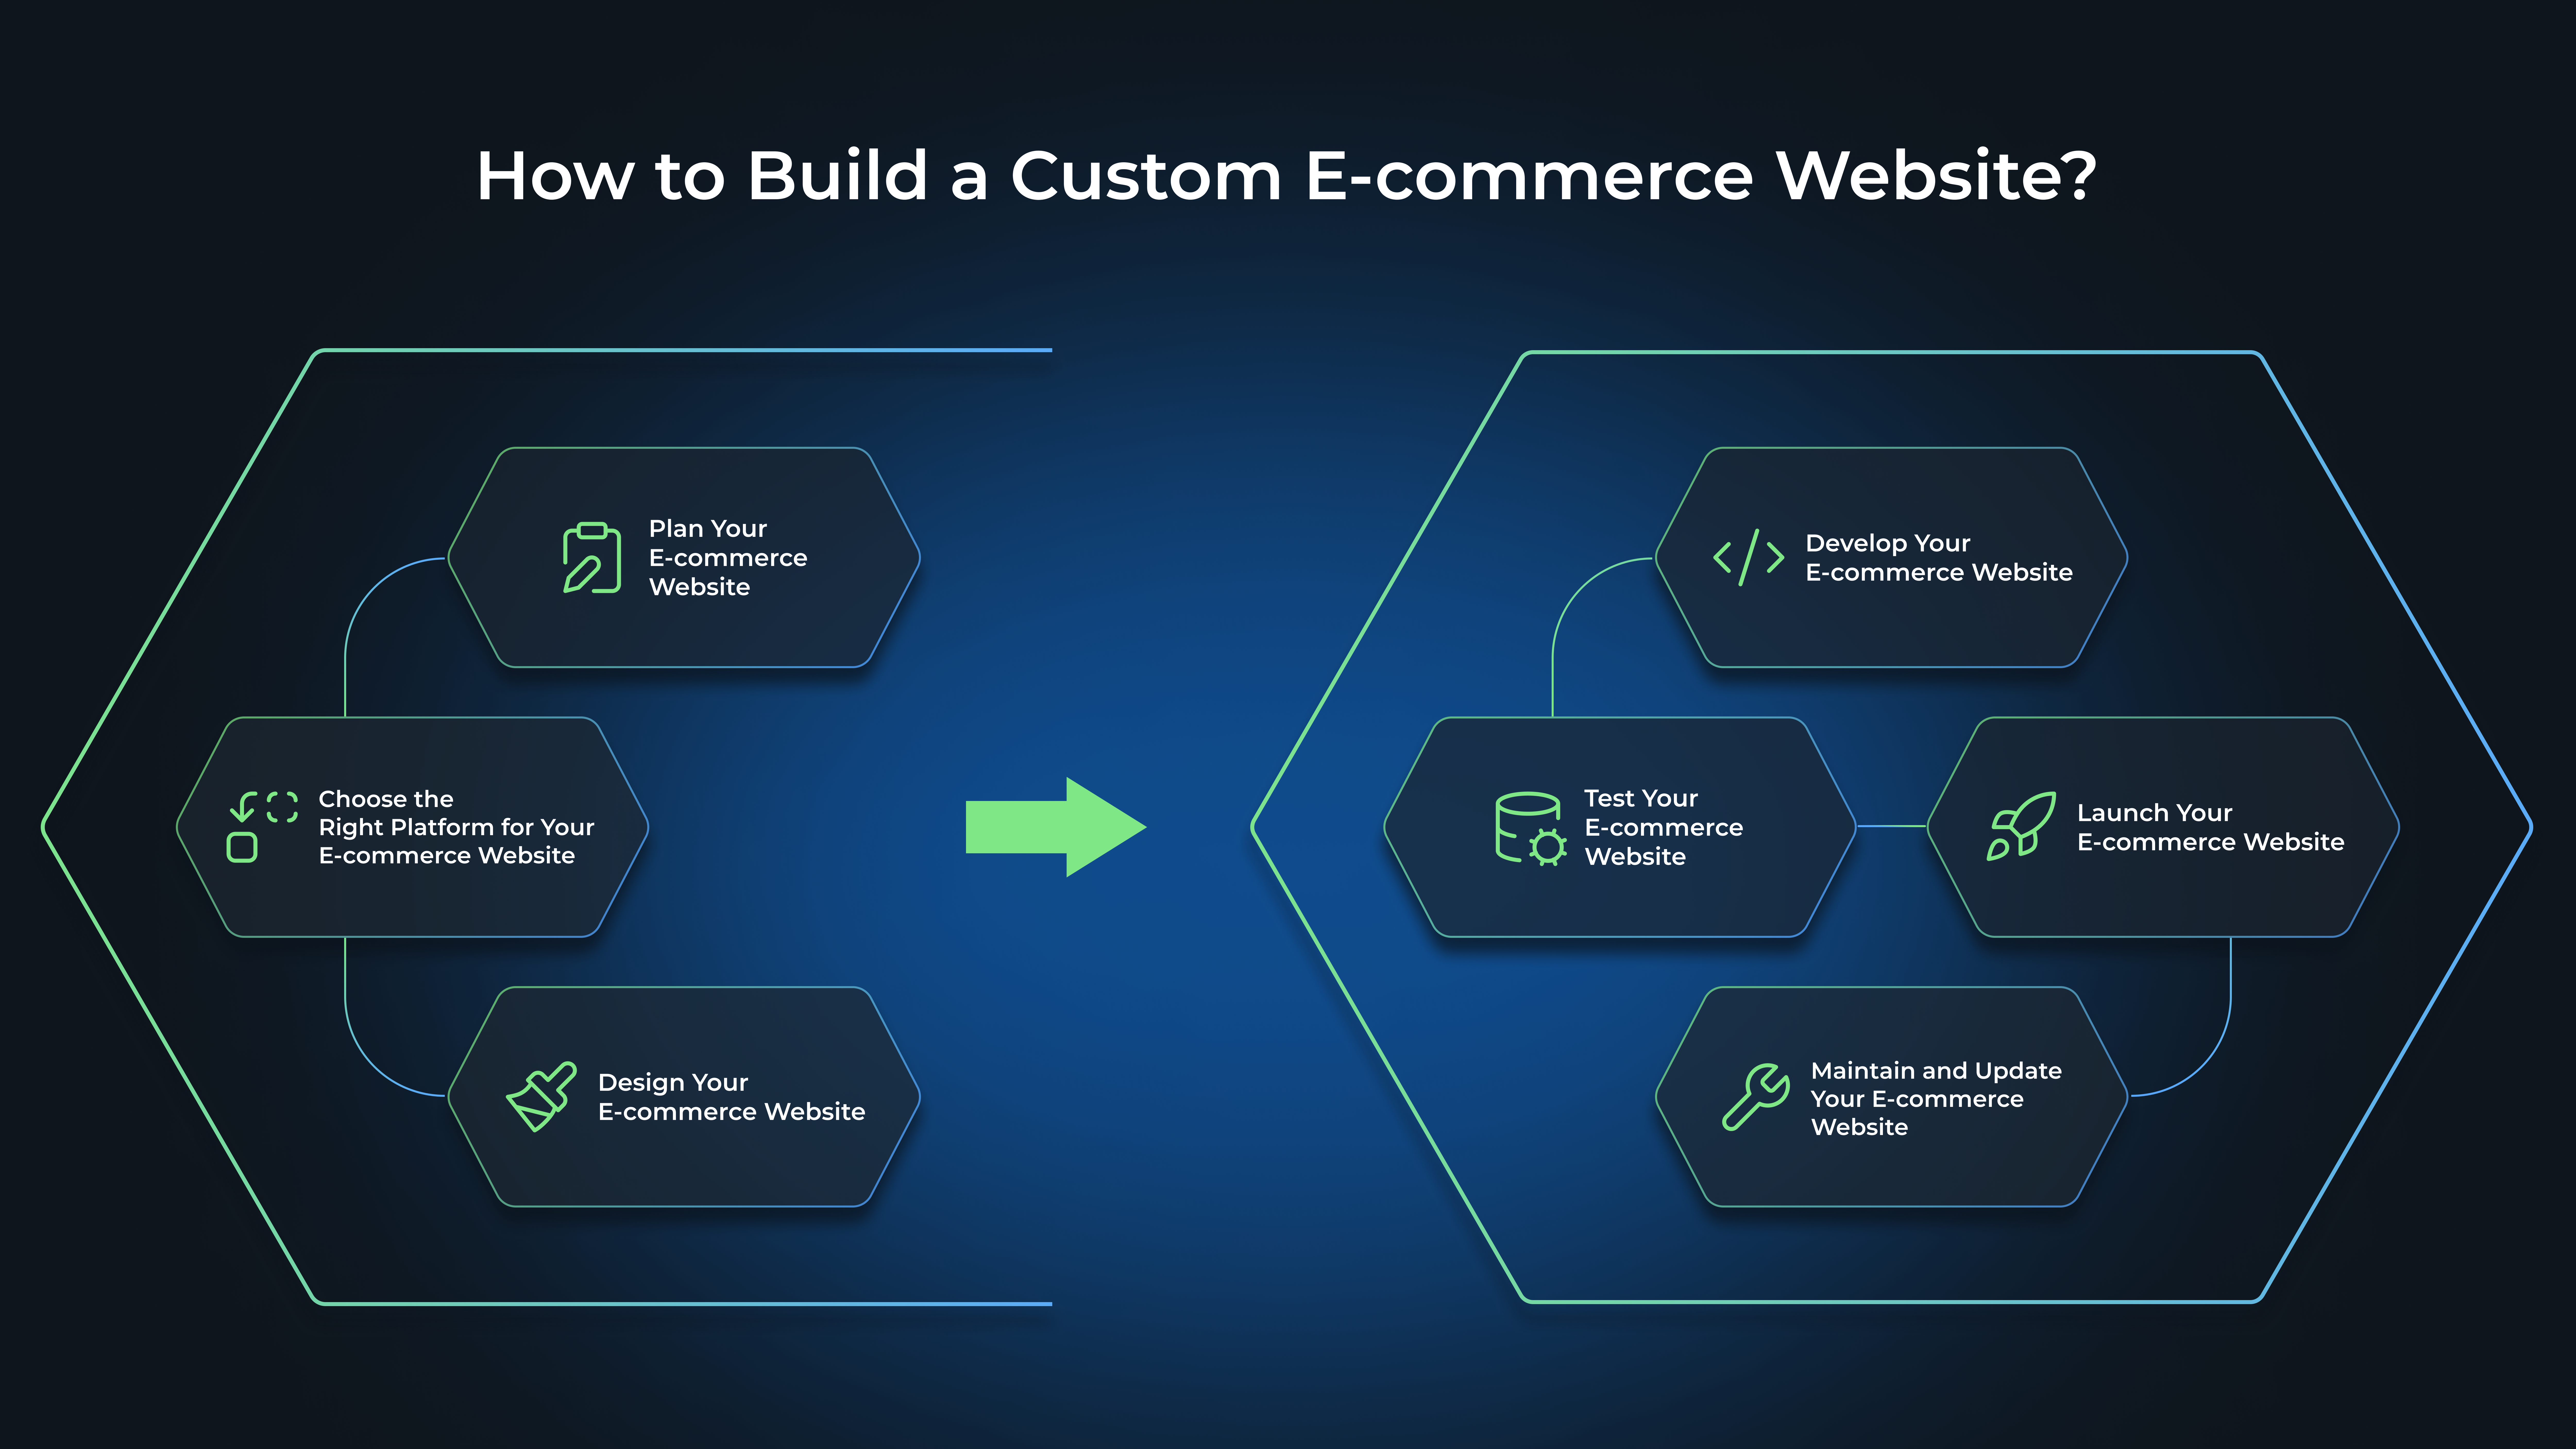 How to Build a Custom E-commerce Website?
1. Plan Your E-commerce Website
2. Choose the Right Platform for Your E-commerce Website
3. Design Your E-commerce Website
4. Develop Your E-commerce Website
5. Test Your E-commerce Website
6. Launch Your E-commerce Website
7. Maintain and Update Your E-commerce Website
